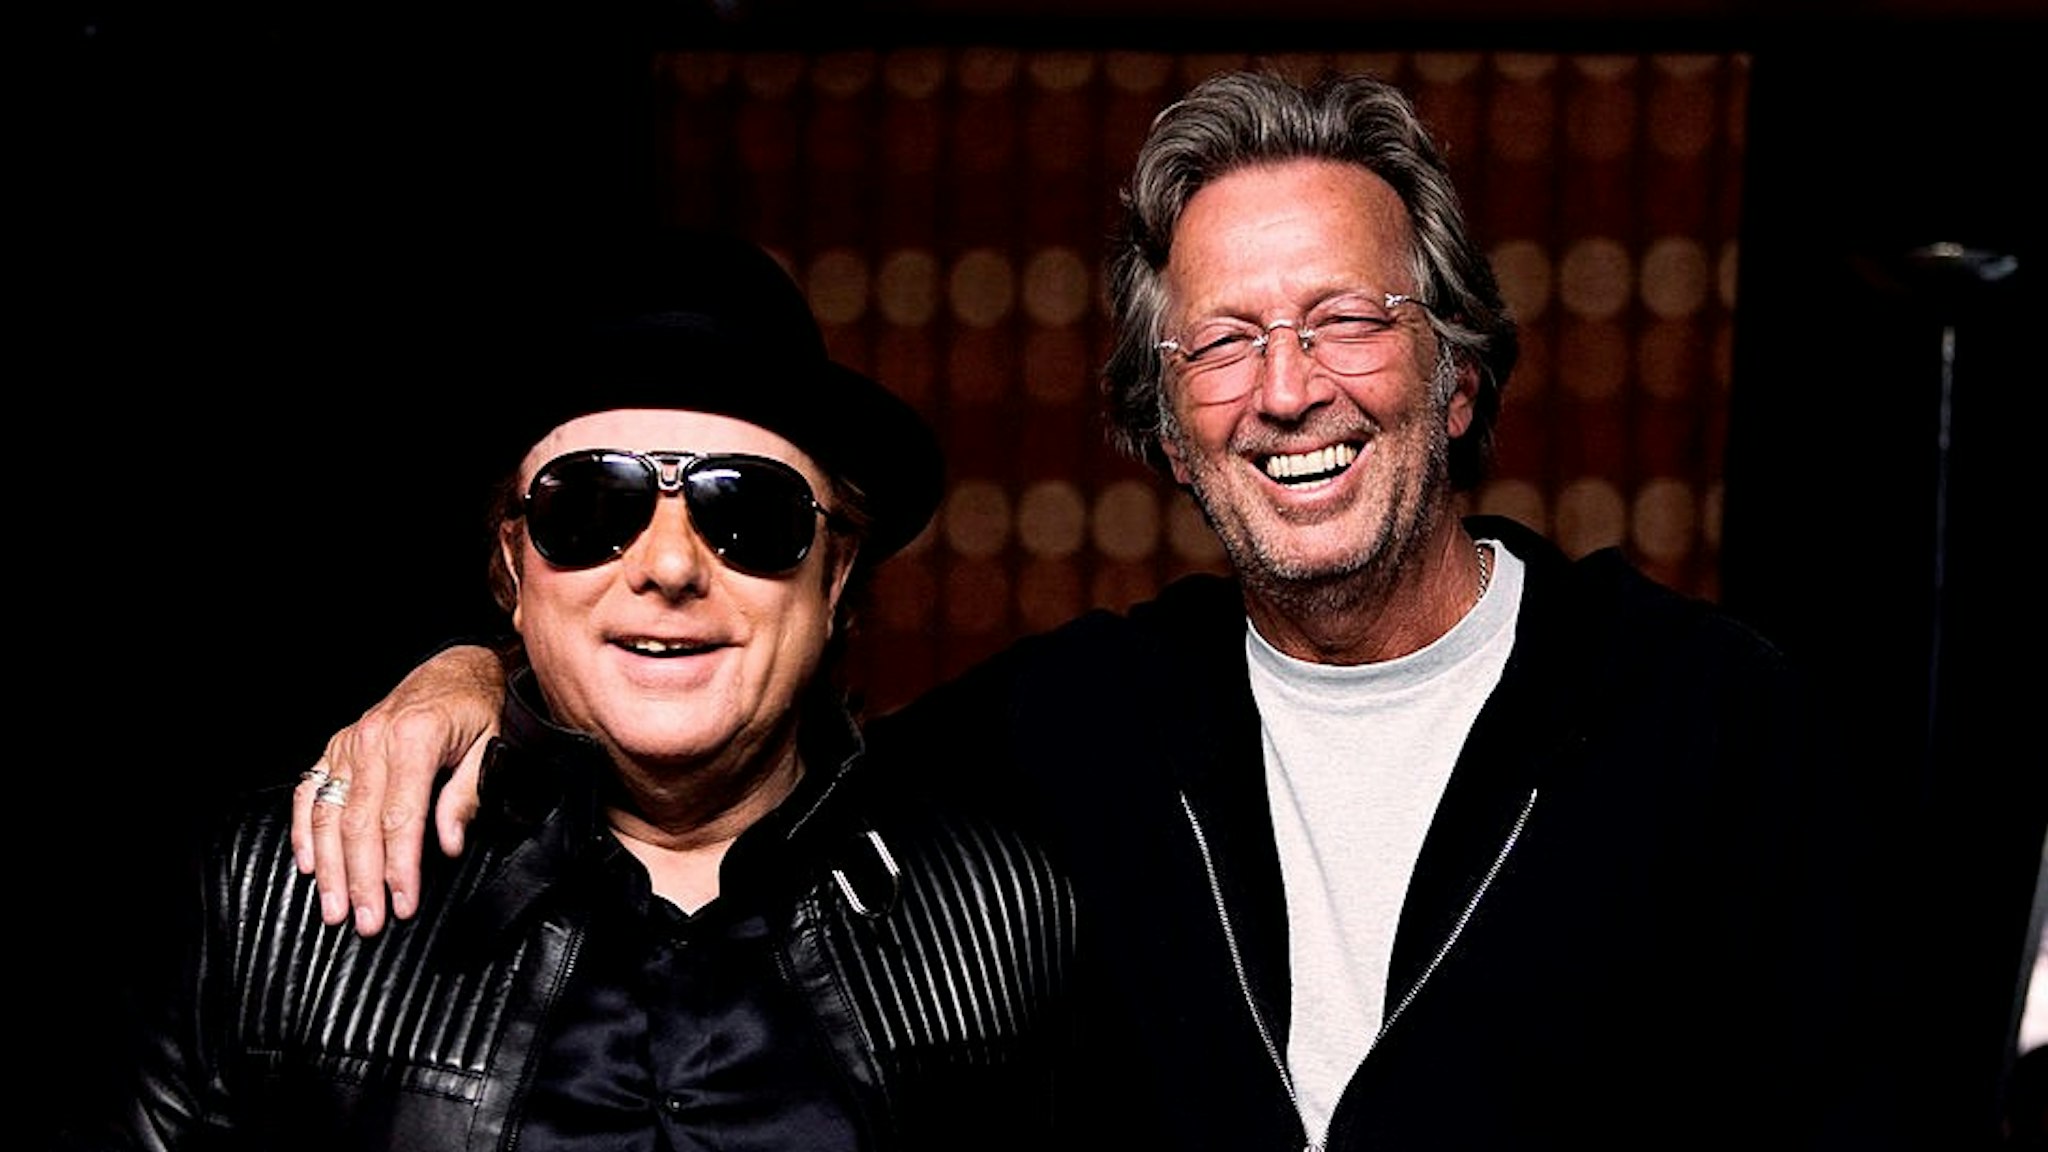 LONDON - APRIL 18: In this handout image provided by Lobeline Communcations, Van Morrison and friend Eric Clapton pose backstage during two sold out nights at London�s Royal Albert Hall April 18, 2009 in London, England. (Photo by